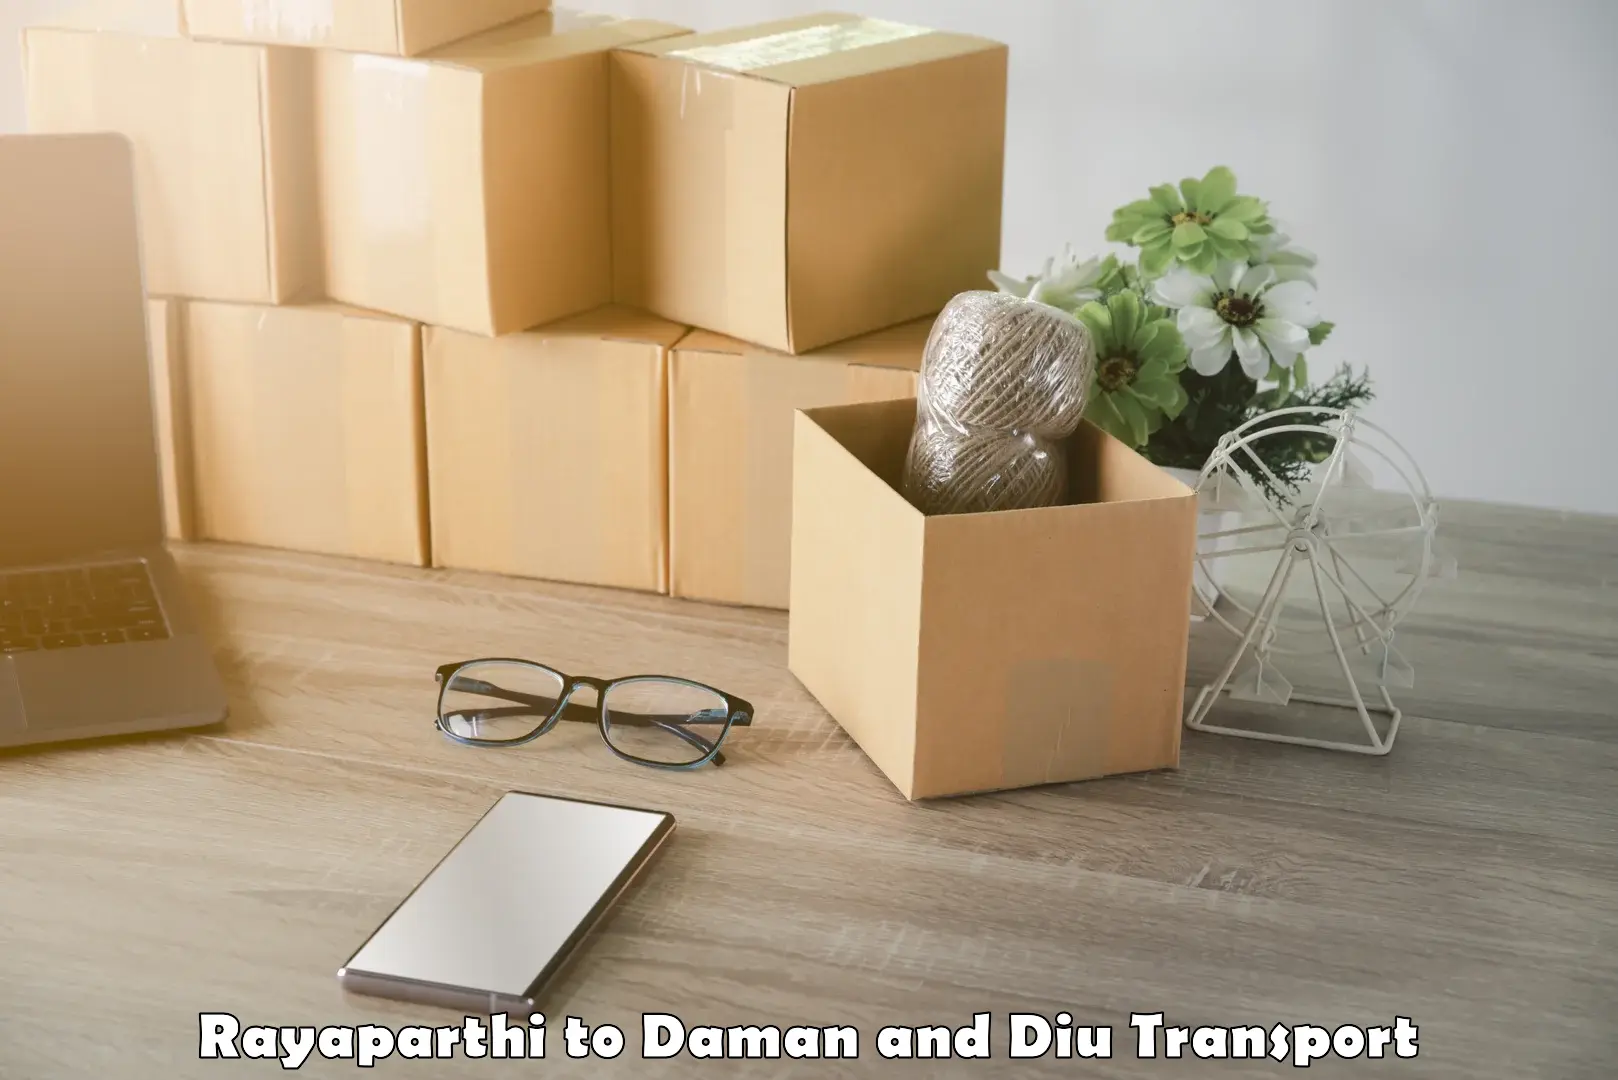 Package delivery services Rayaparthi to Daman and Diu